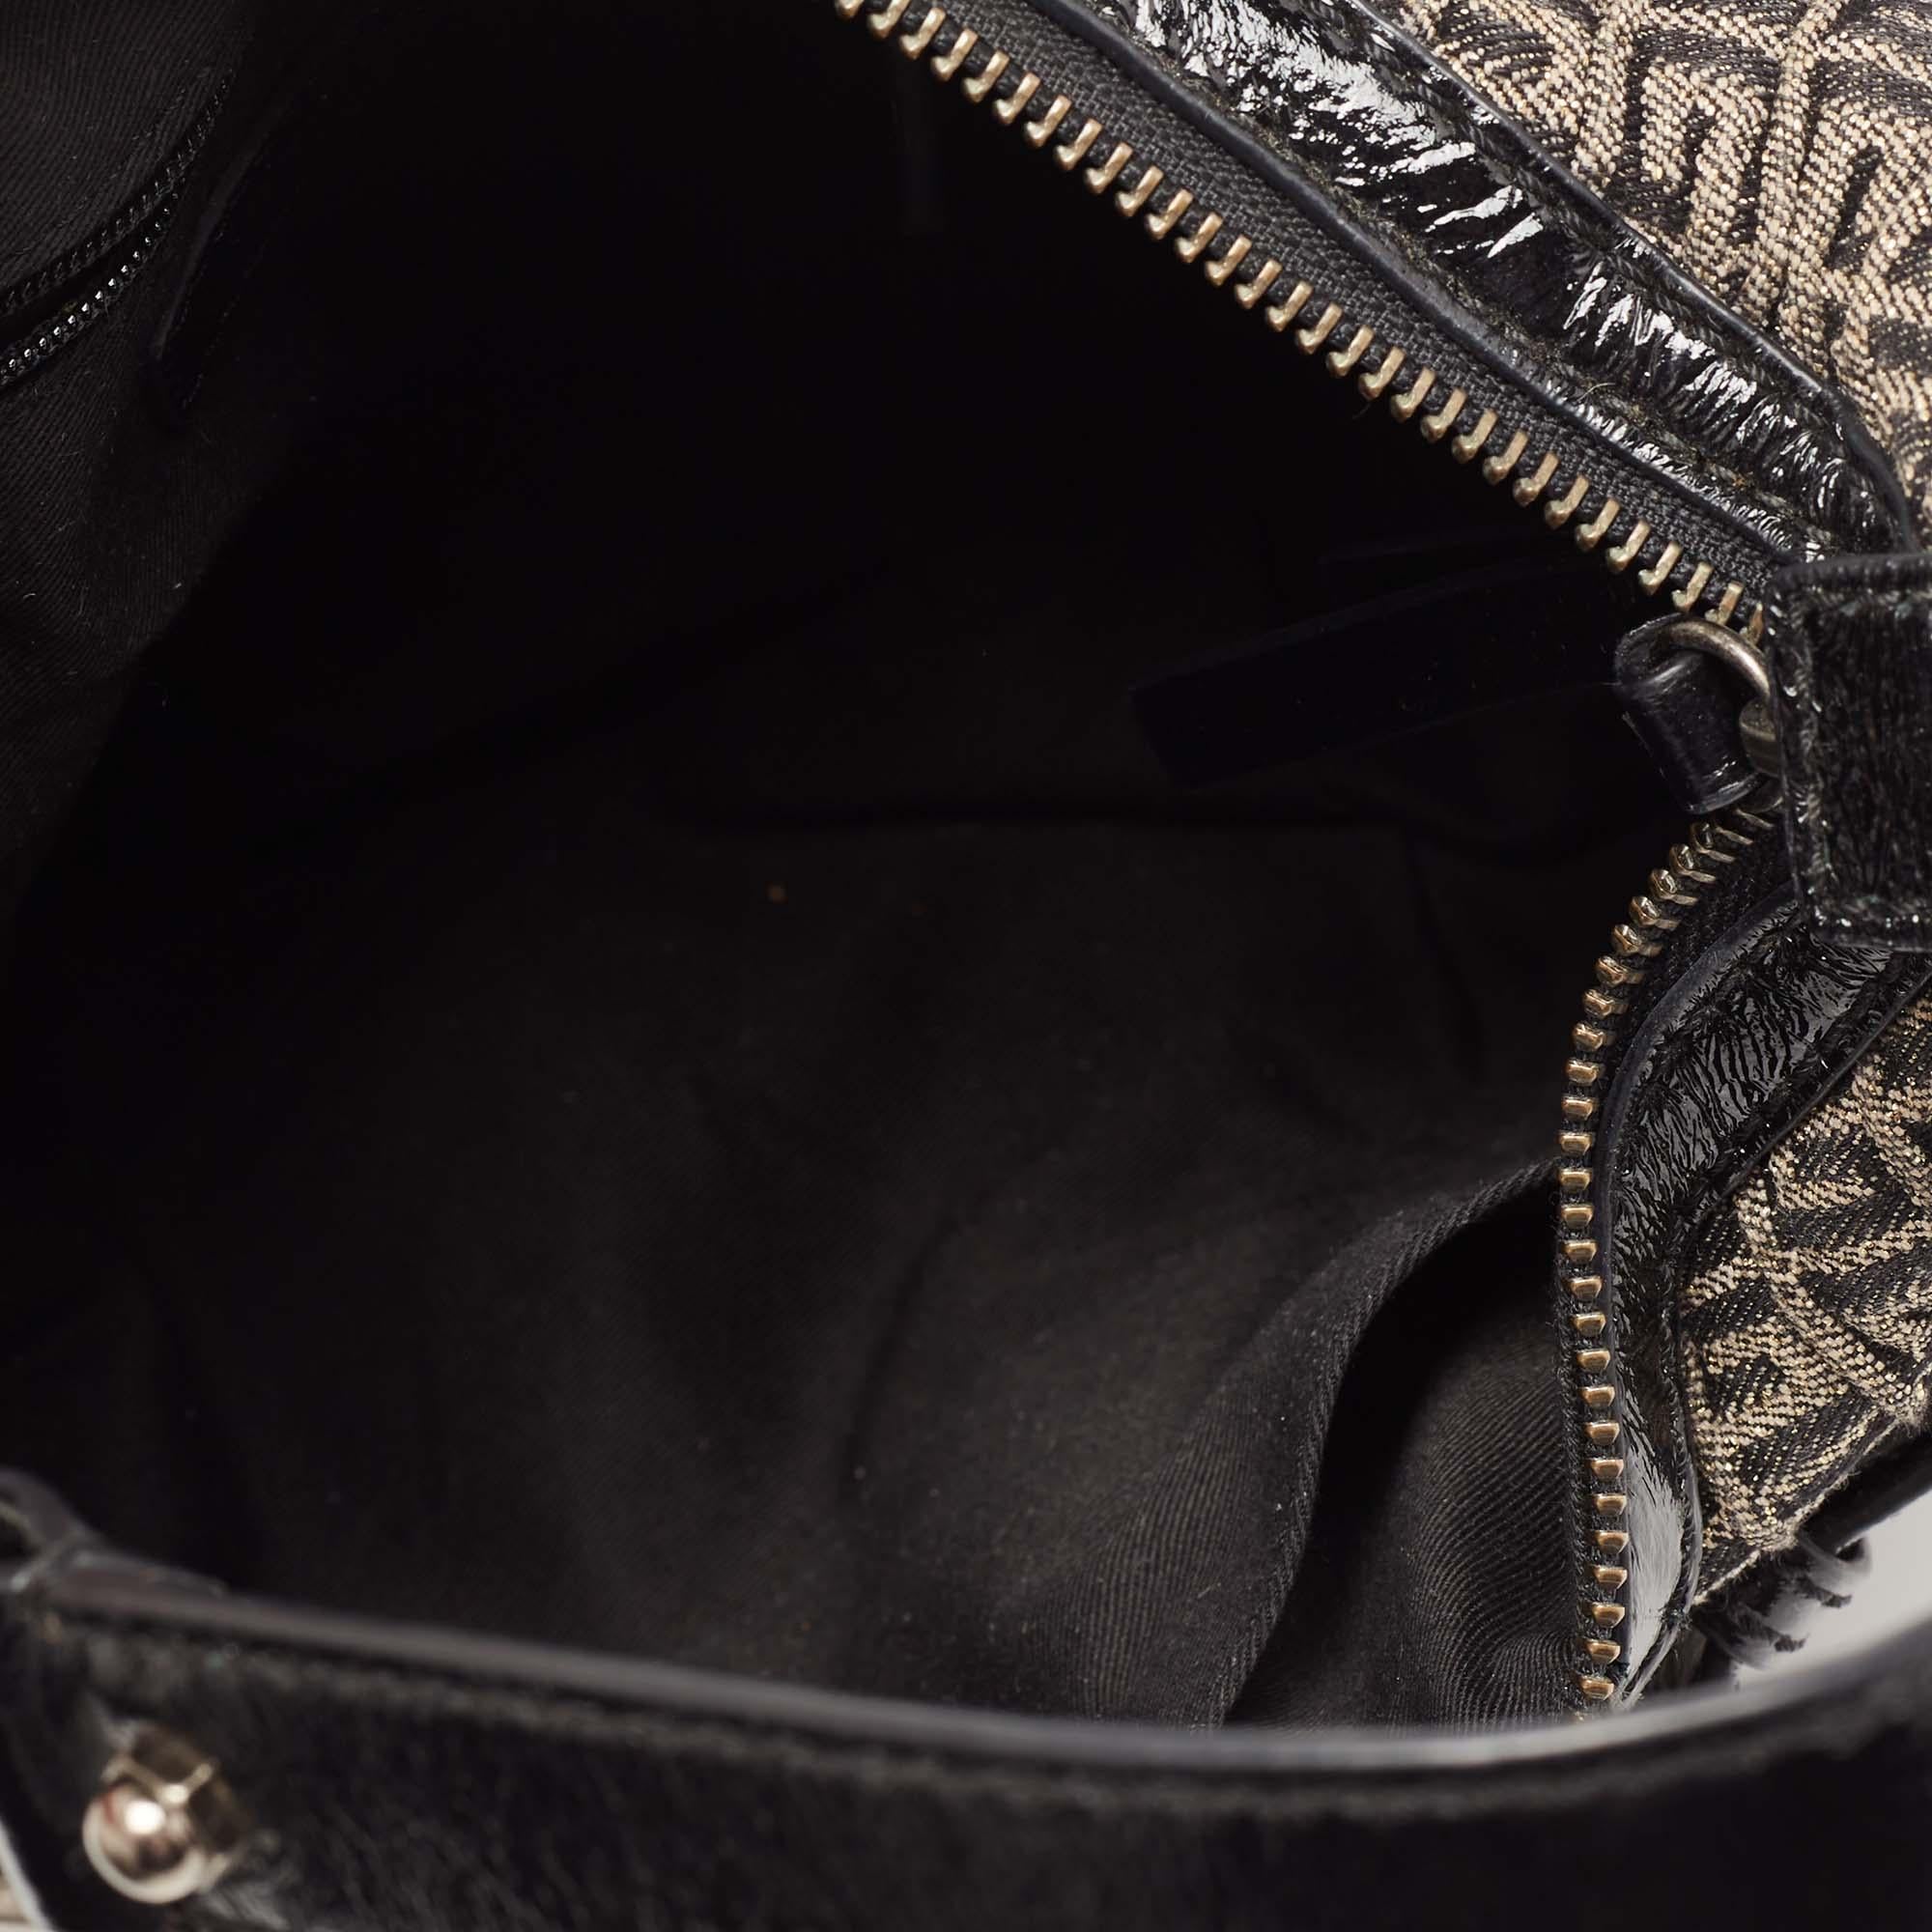 Givenchy Metallic/Black Monogram Canvas And Patent Leather Hobo 2